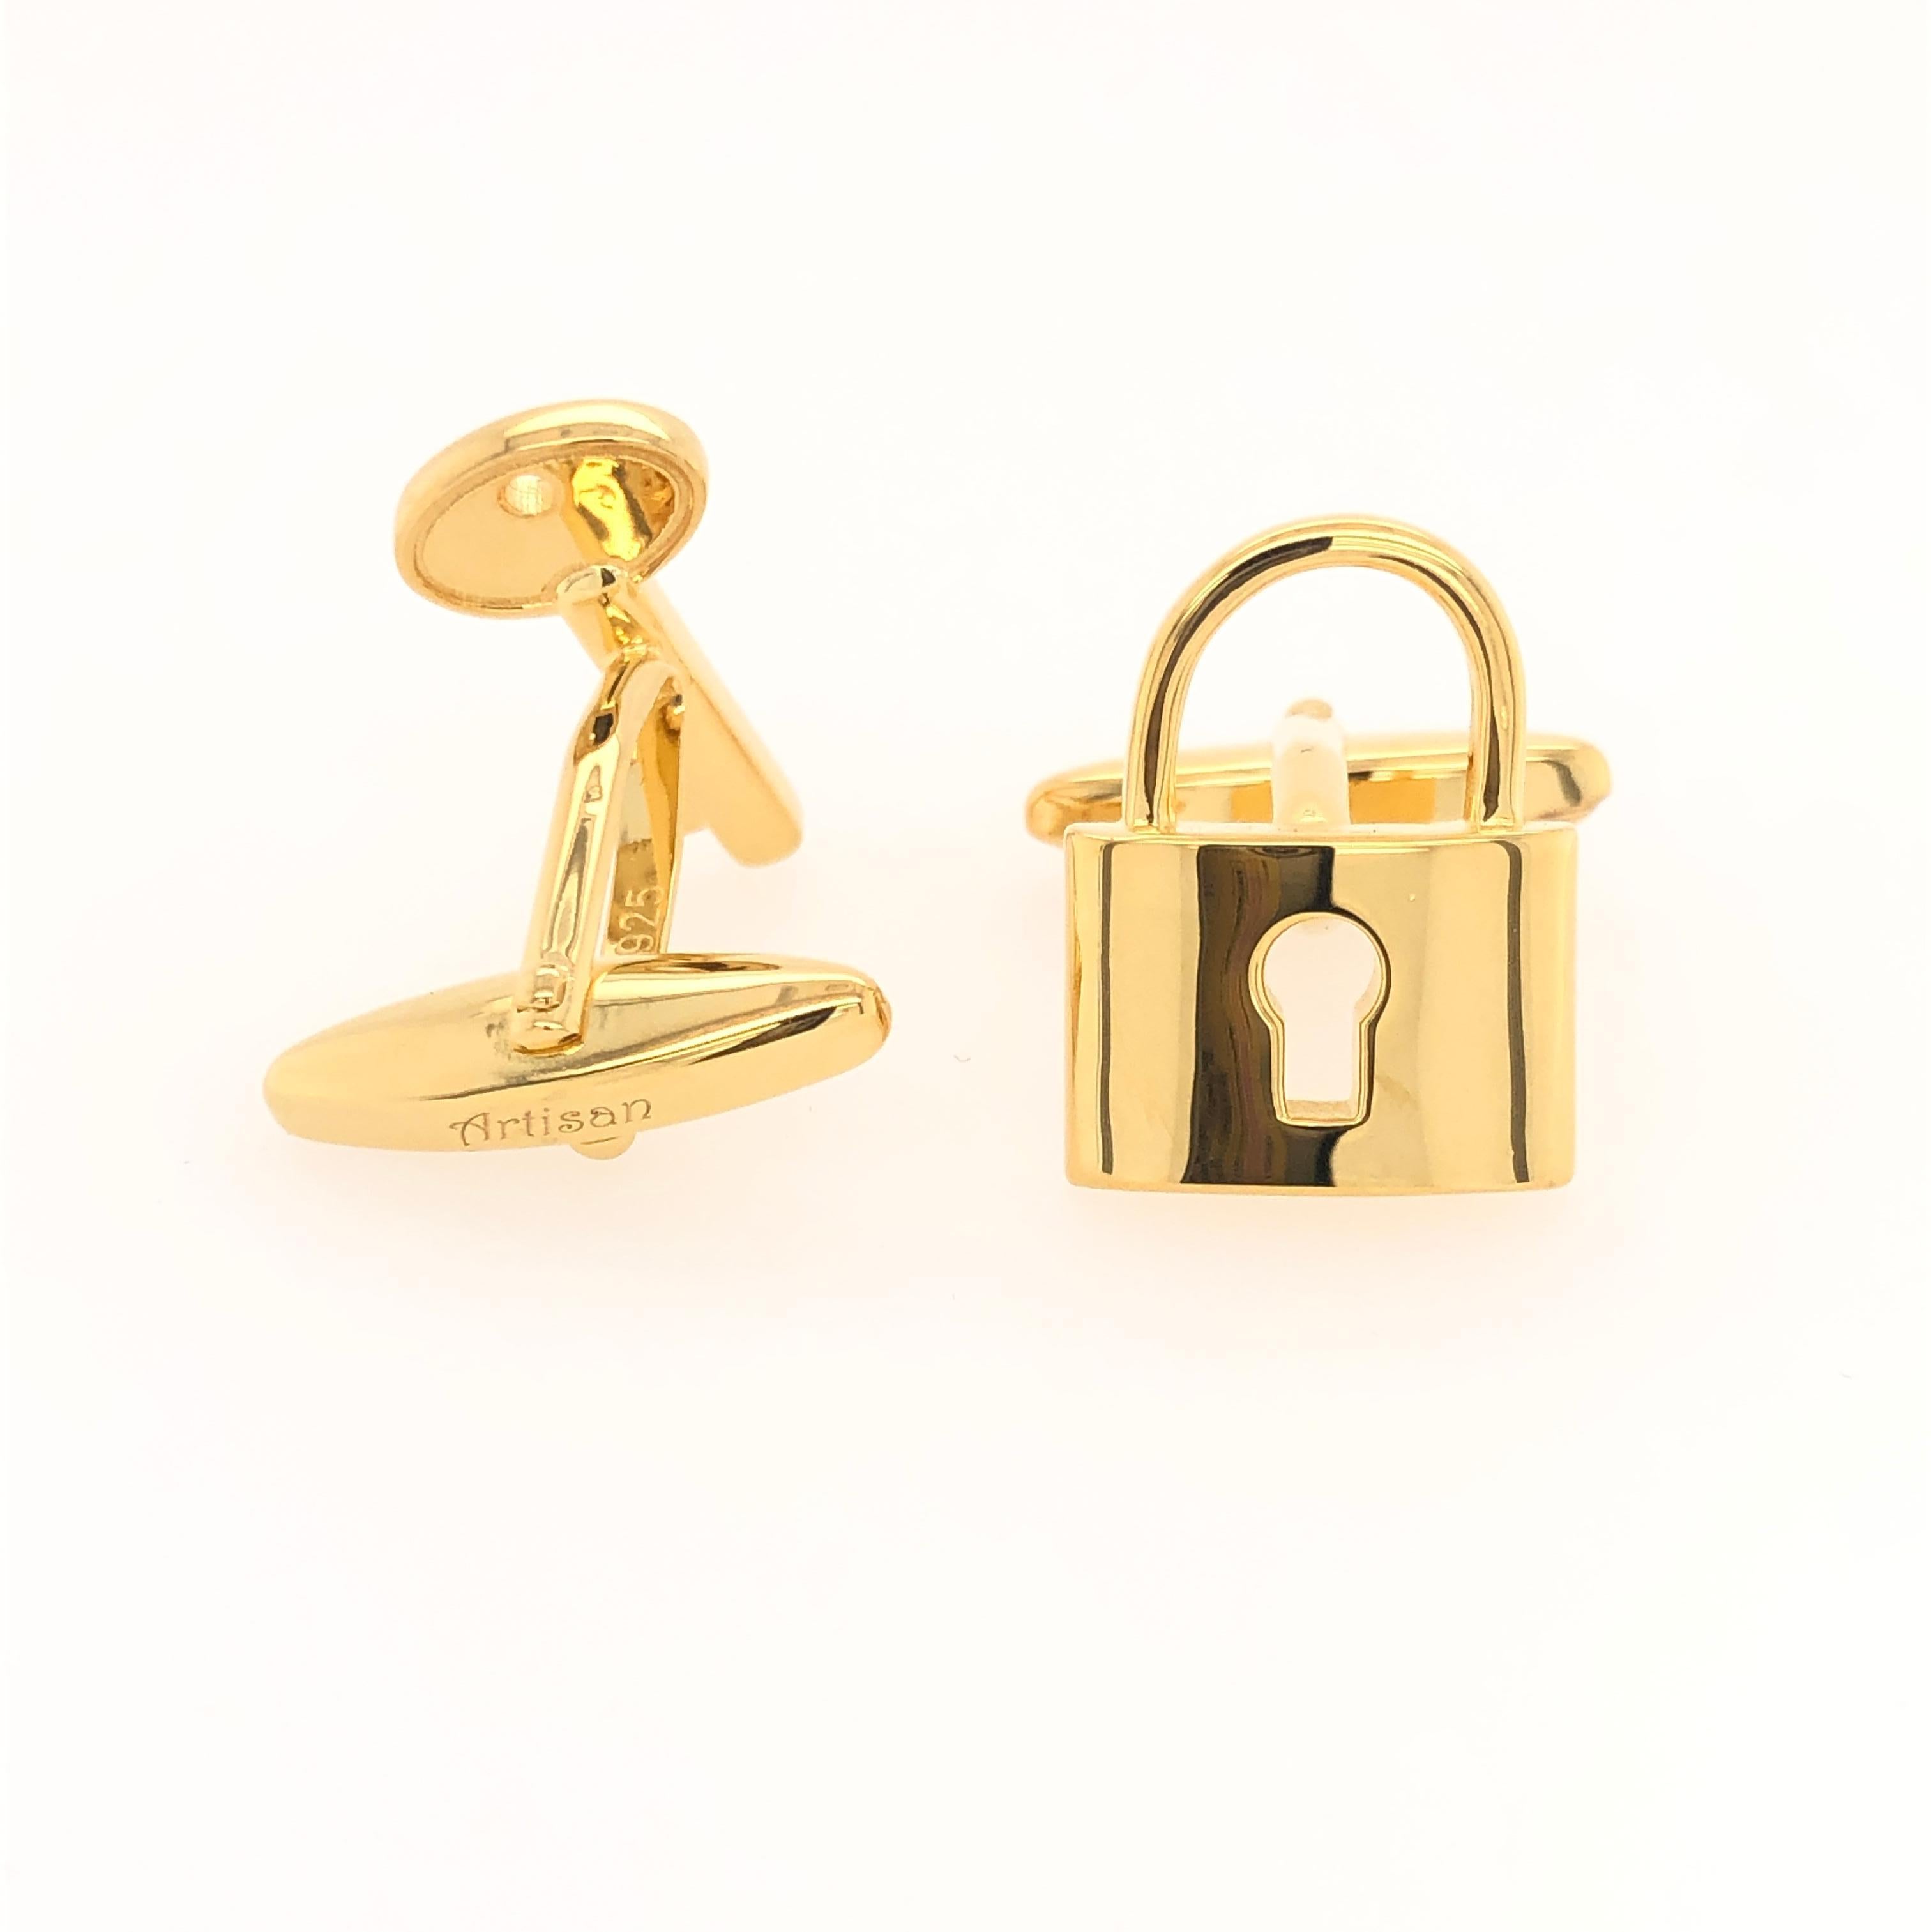 18K gold plated Silver lock and key men's cuff link.

Silver: 10.60 gms
